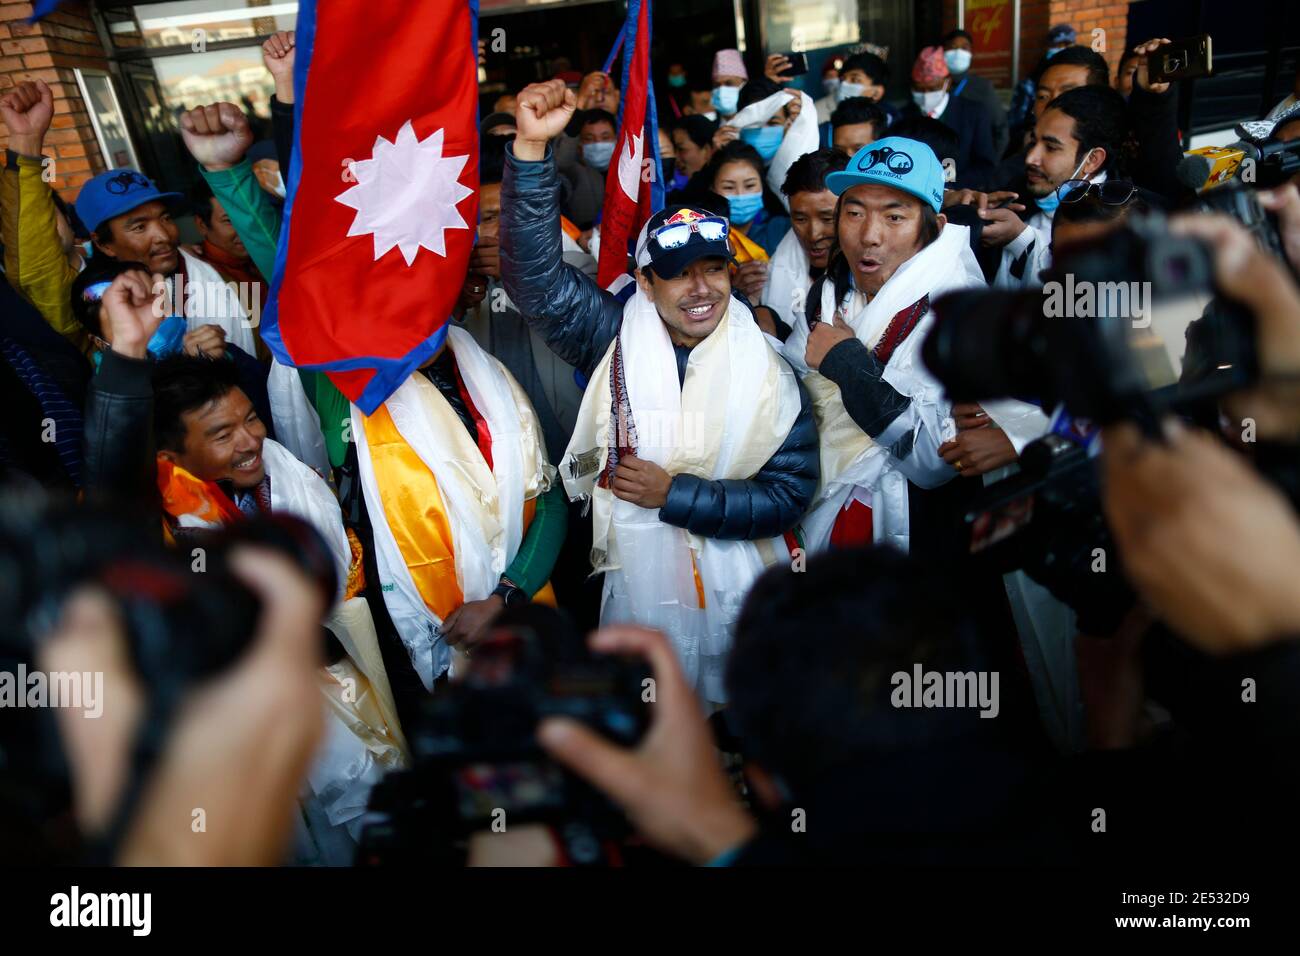 Kathmandu, Nepal. 25th Jan, 2021. Nepalese climber Nirmal Purja, who along with his team recently made history by scaling the K2 summit in the winter season, gestures upon his arrival to Tribhuvan International Airport in Kathmandu, Nepal on Tuesday, January 26, 2021. Credit: Skanda Gautam/ZUMA Wire/Alamy Live News Stock Photo